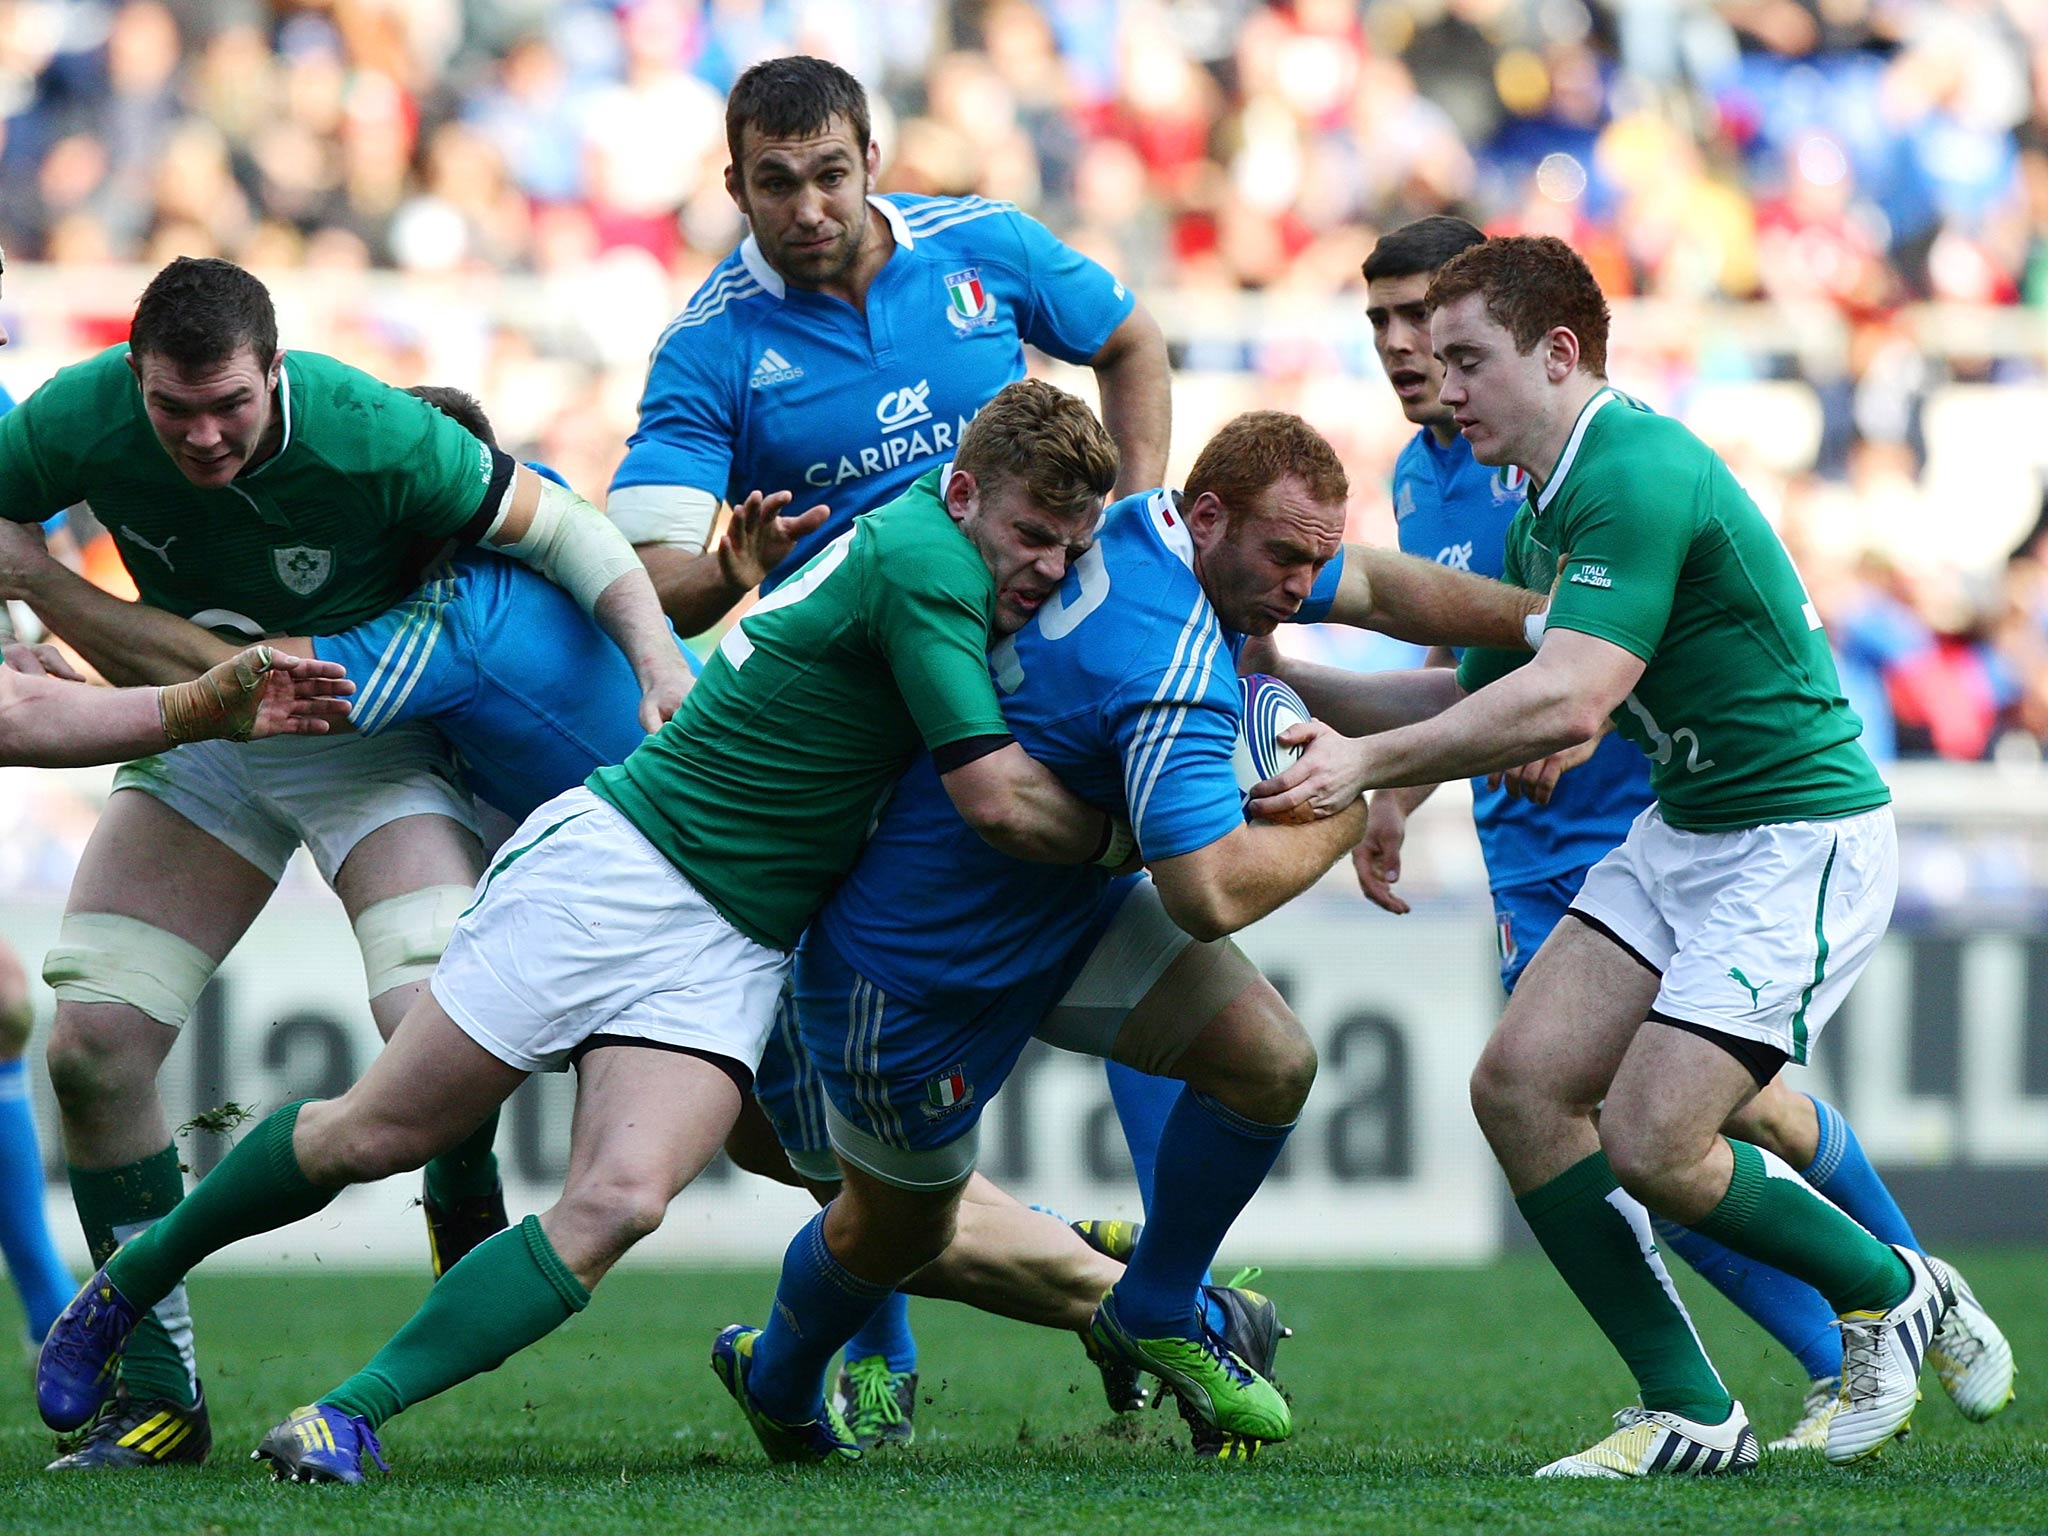 Gonzalo Garcia of Italy (C) is tackled during the RBS Six Nations match between Italy and Ireland